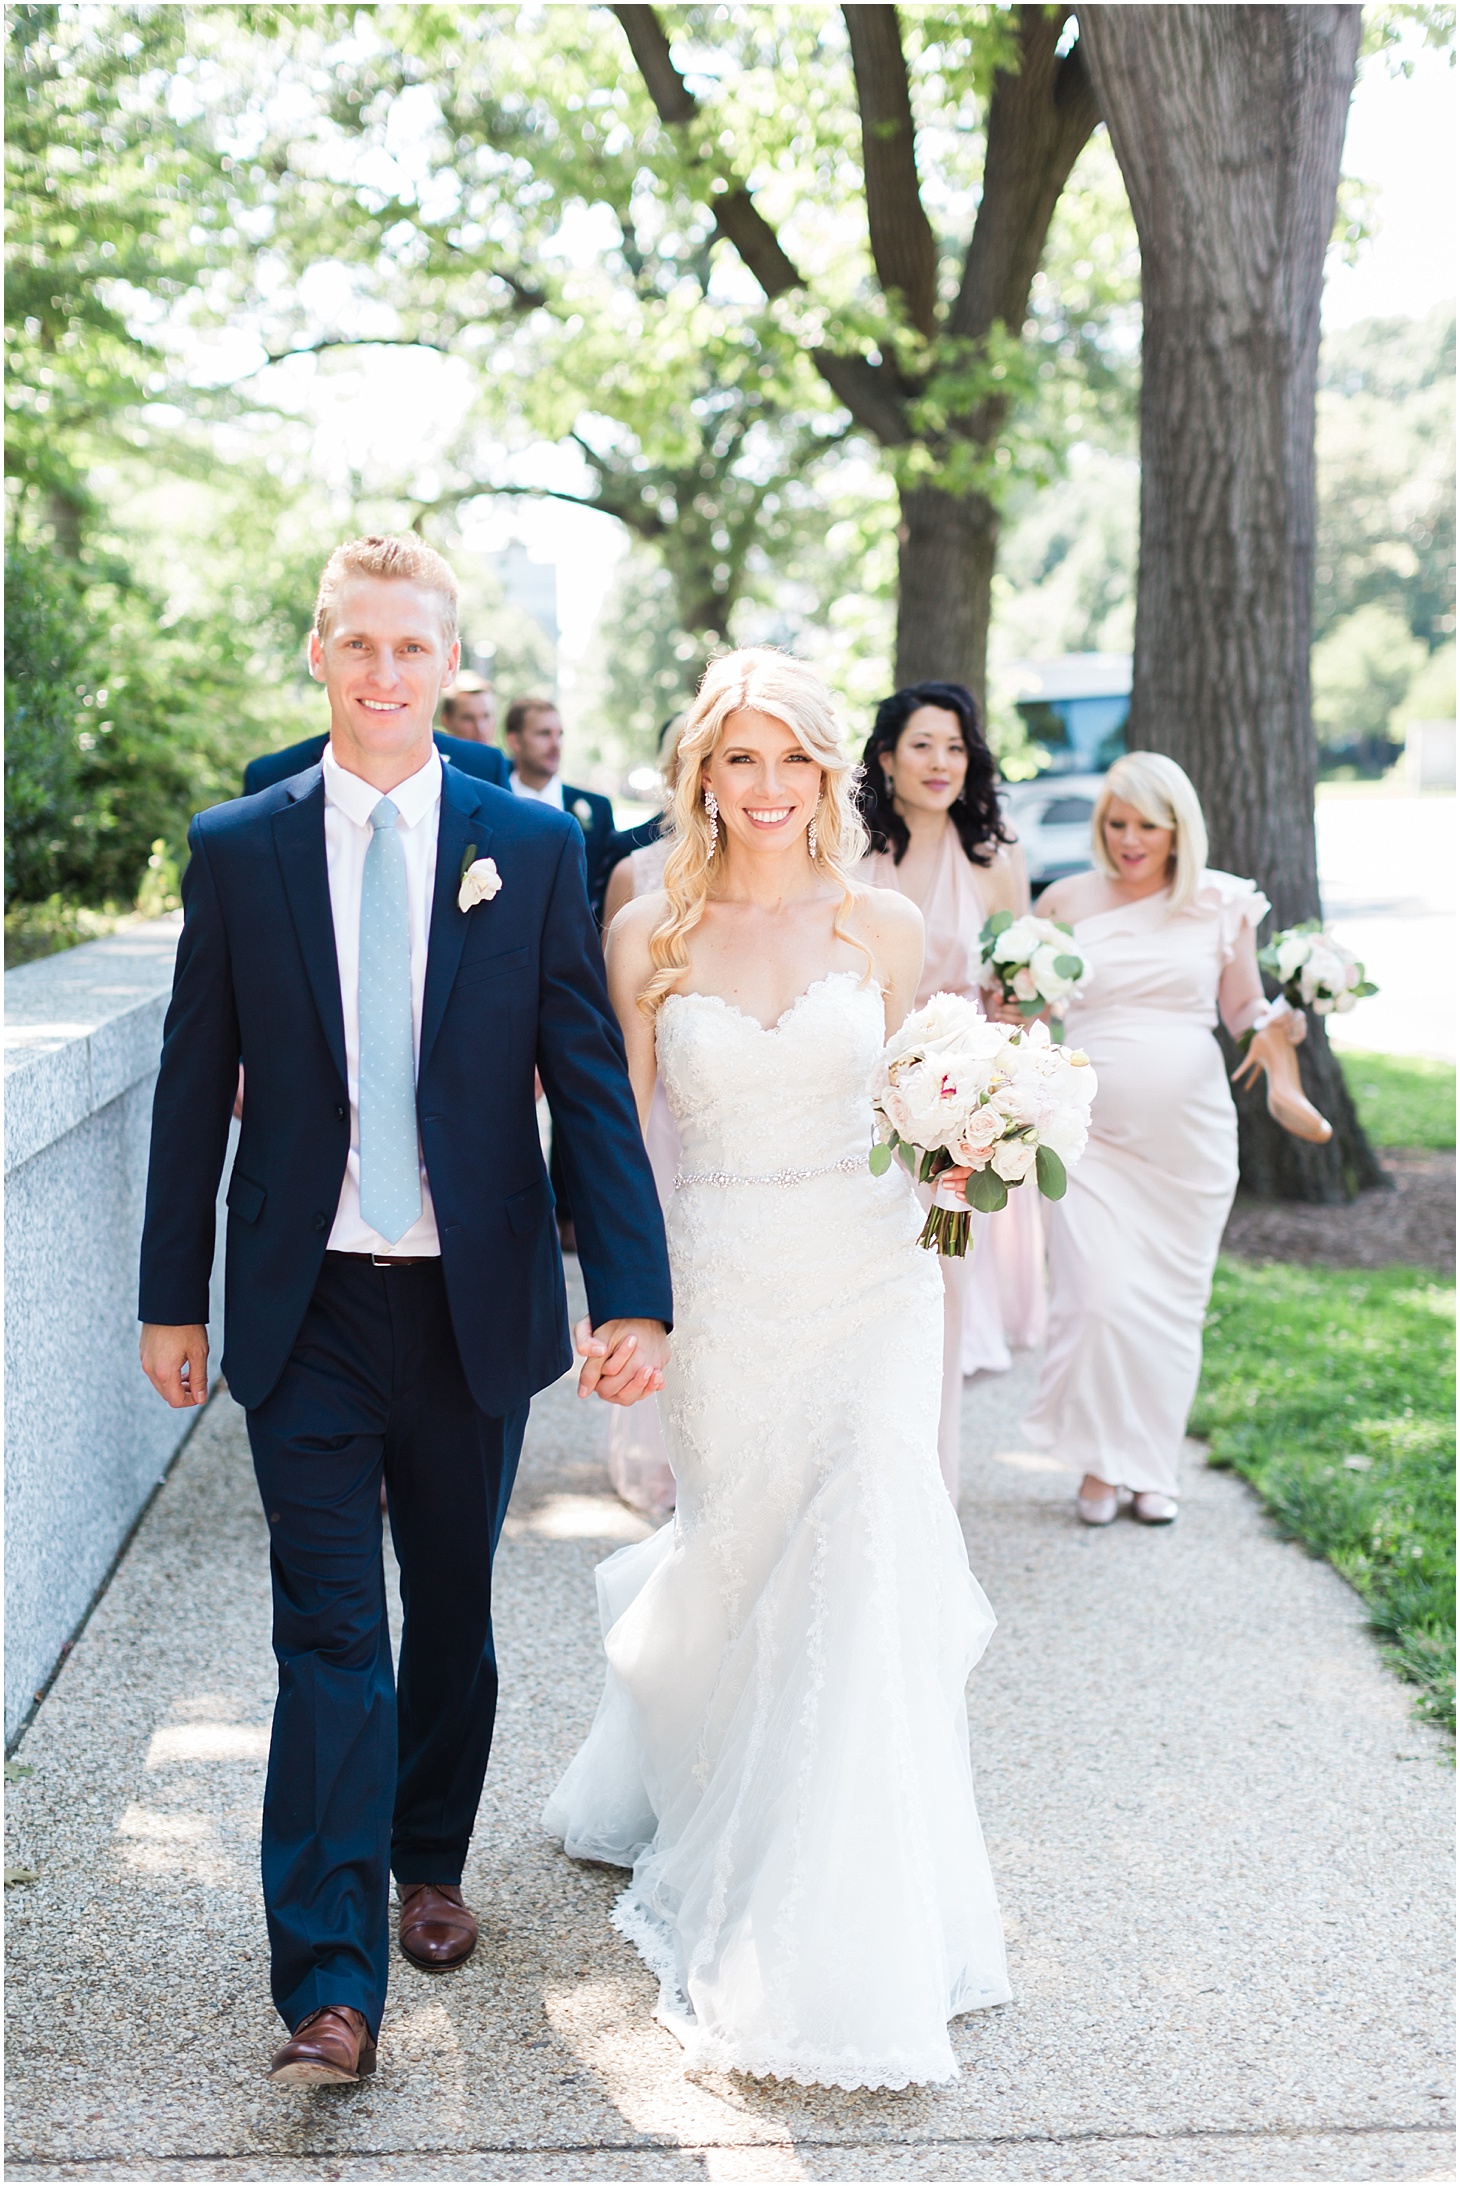 Bridal Party in DC, Navy and Blush Summer Wedding at the Army and Navy Club, Ceremony at Capitol Hill Baptist Church, Sarah Bradshaw Photography, DC Wedding Photographer